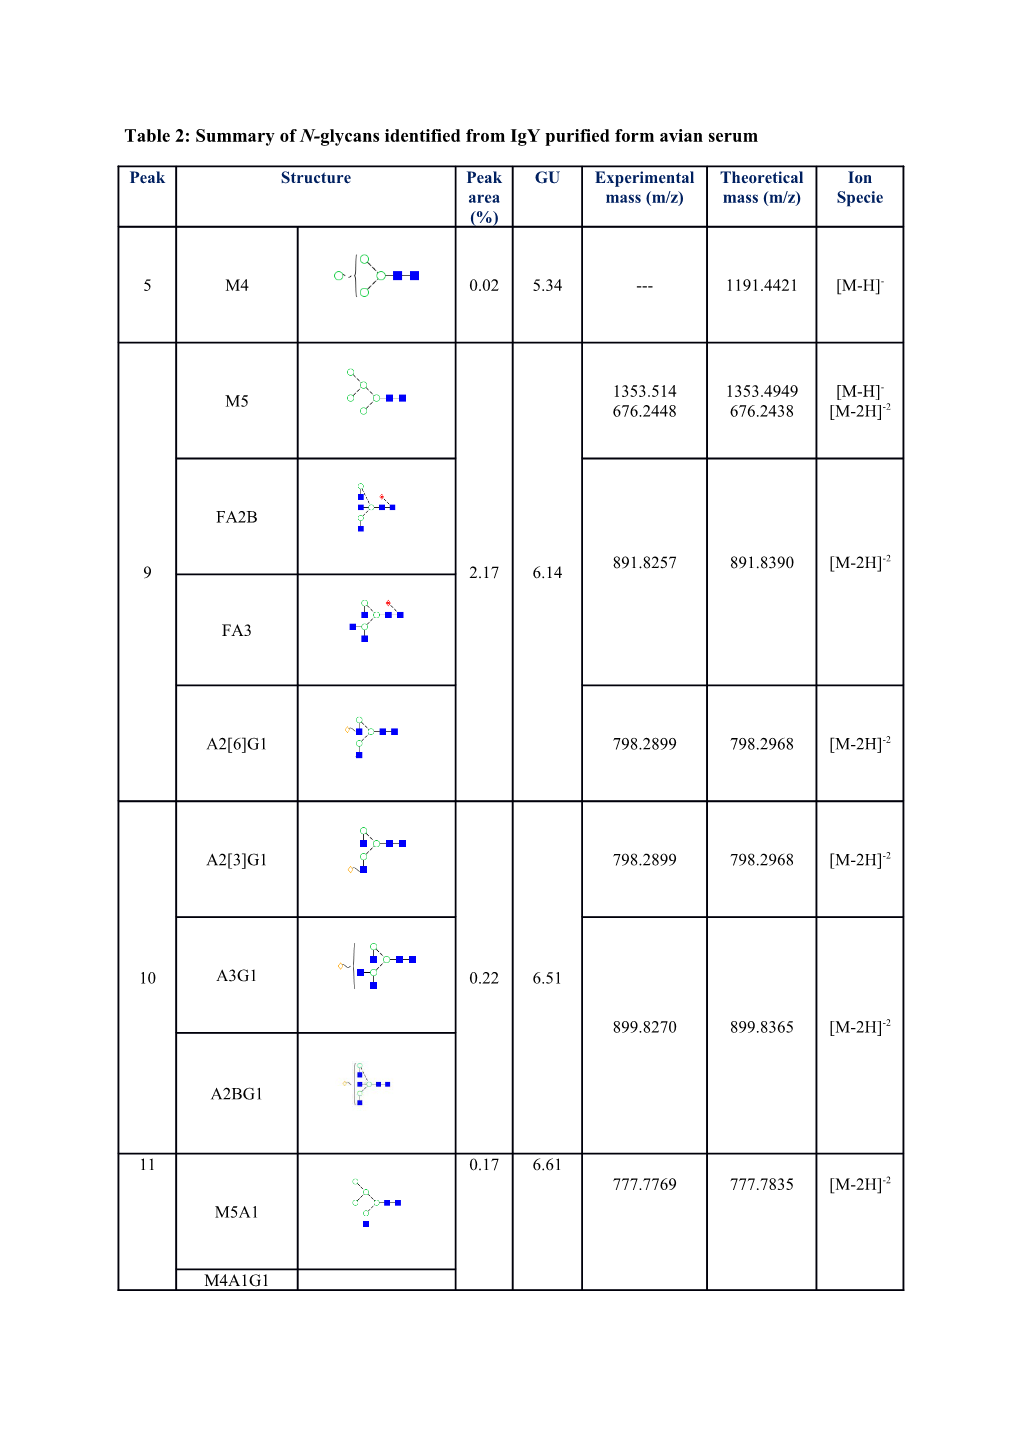 Table 2: Summary of N-Glycans Identified from Igy Purified Form Avian Serum